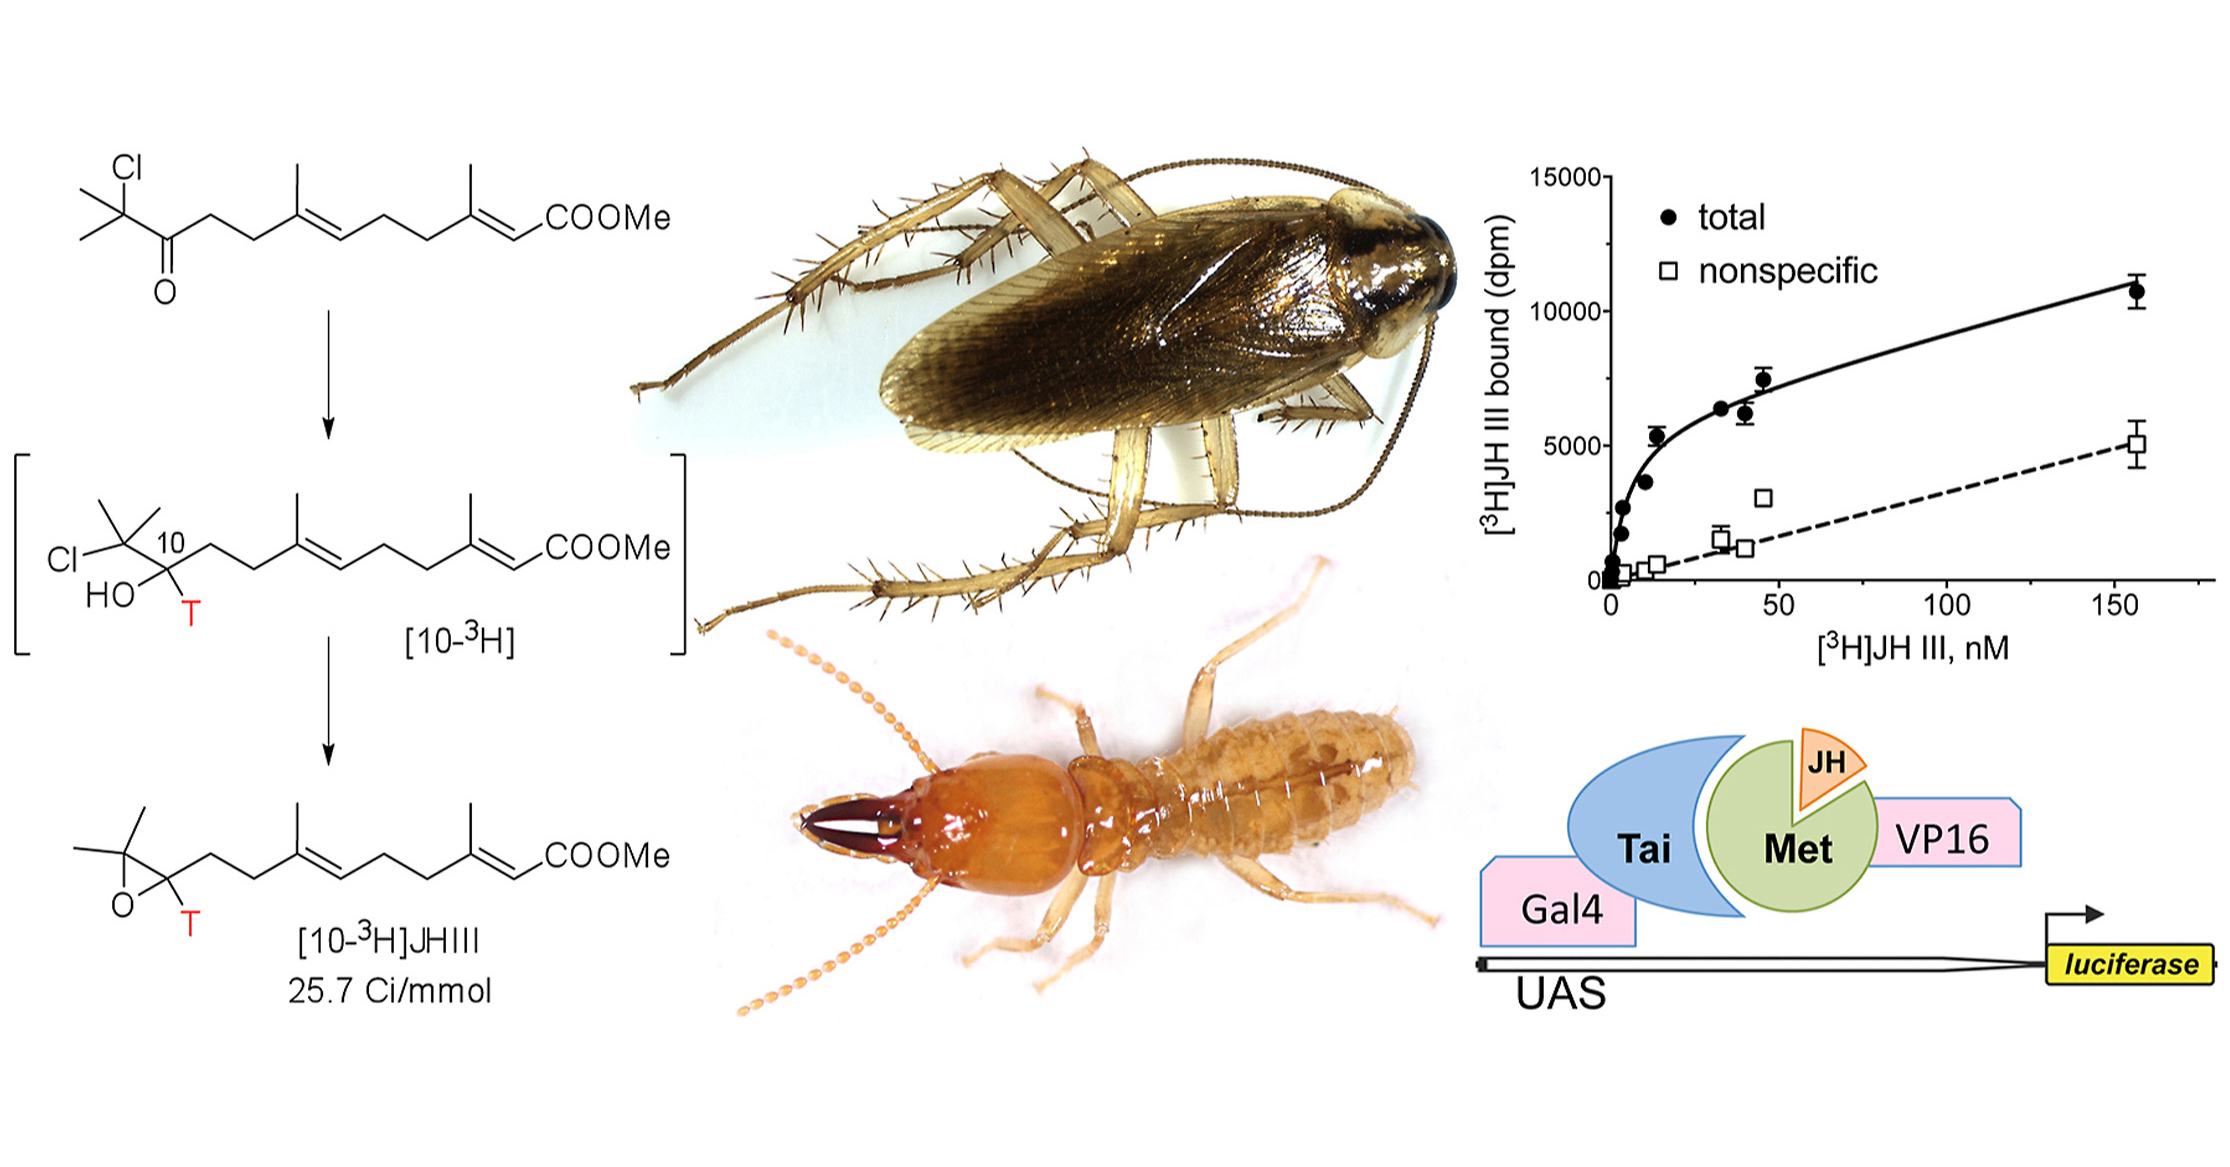 Binding of radiolabeled juvenile hormone by JH receptors in basal insects